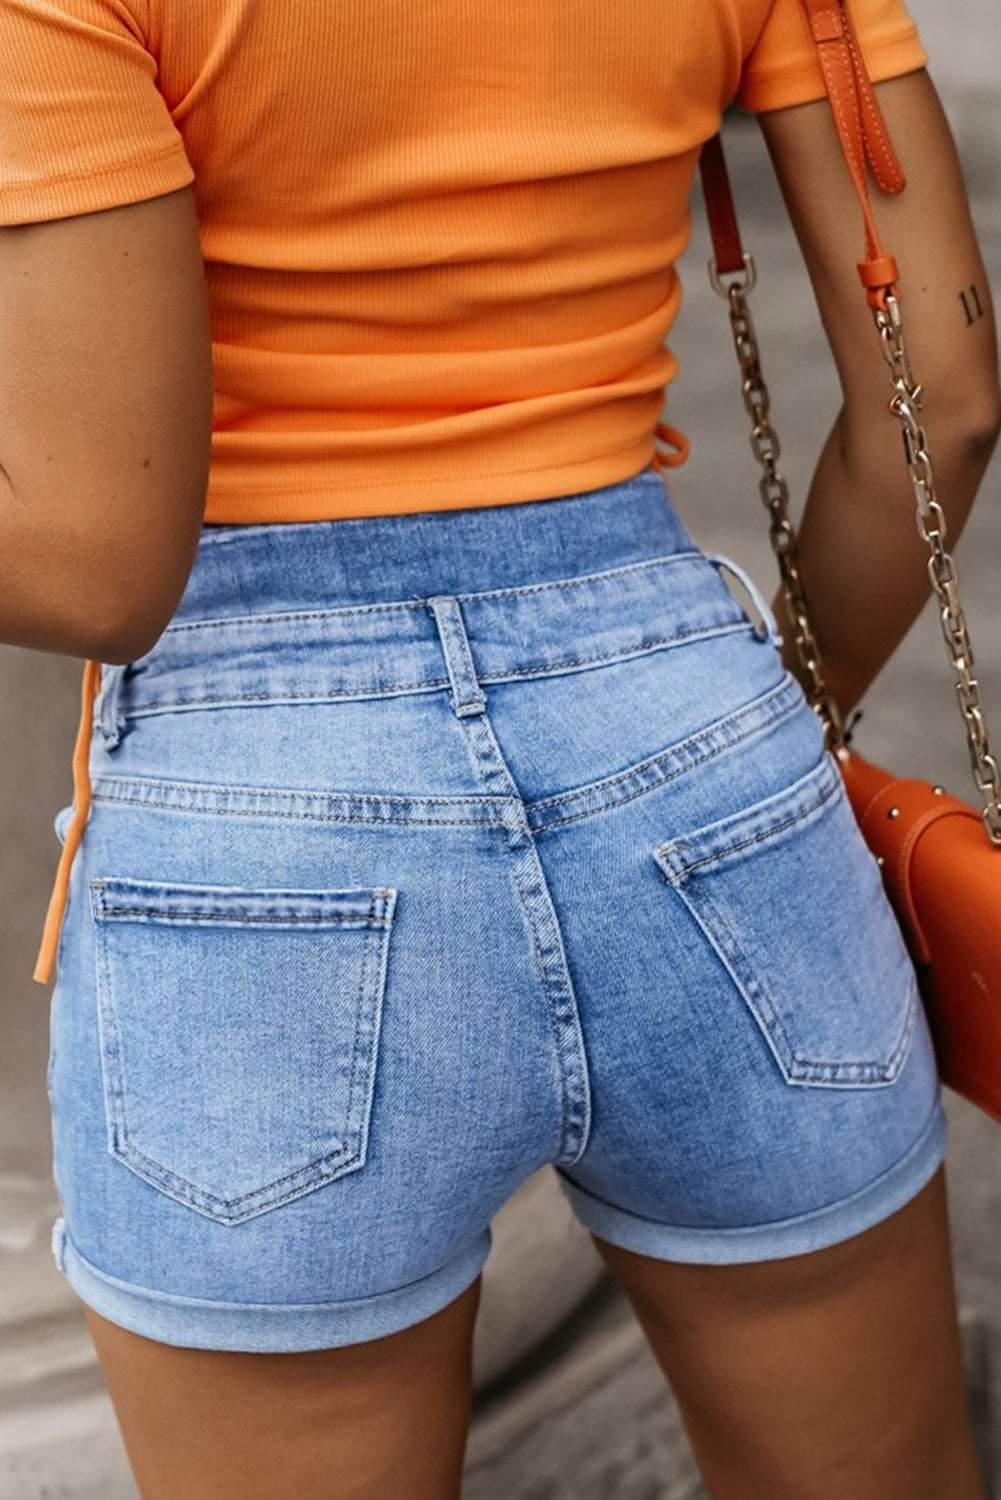 Button-Fly Denim Shorts with Pockets apparel & accessories